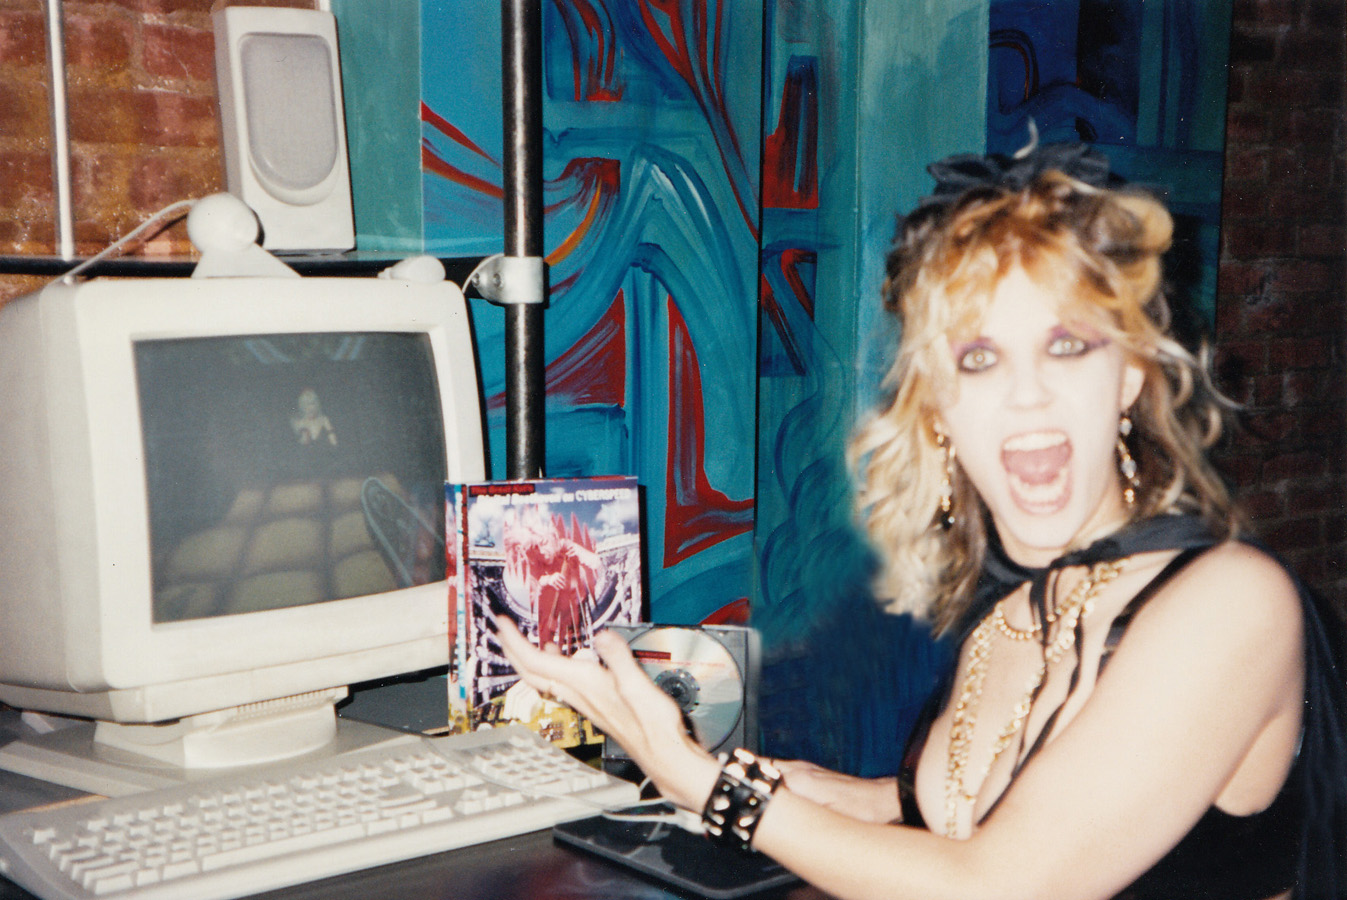 "DIGITAL BEETHOVEN ON CYBERSPEED" ERA'S THE GREAT KAT, FUTURIST, DEMOS the CD-ROM IN NYC!